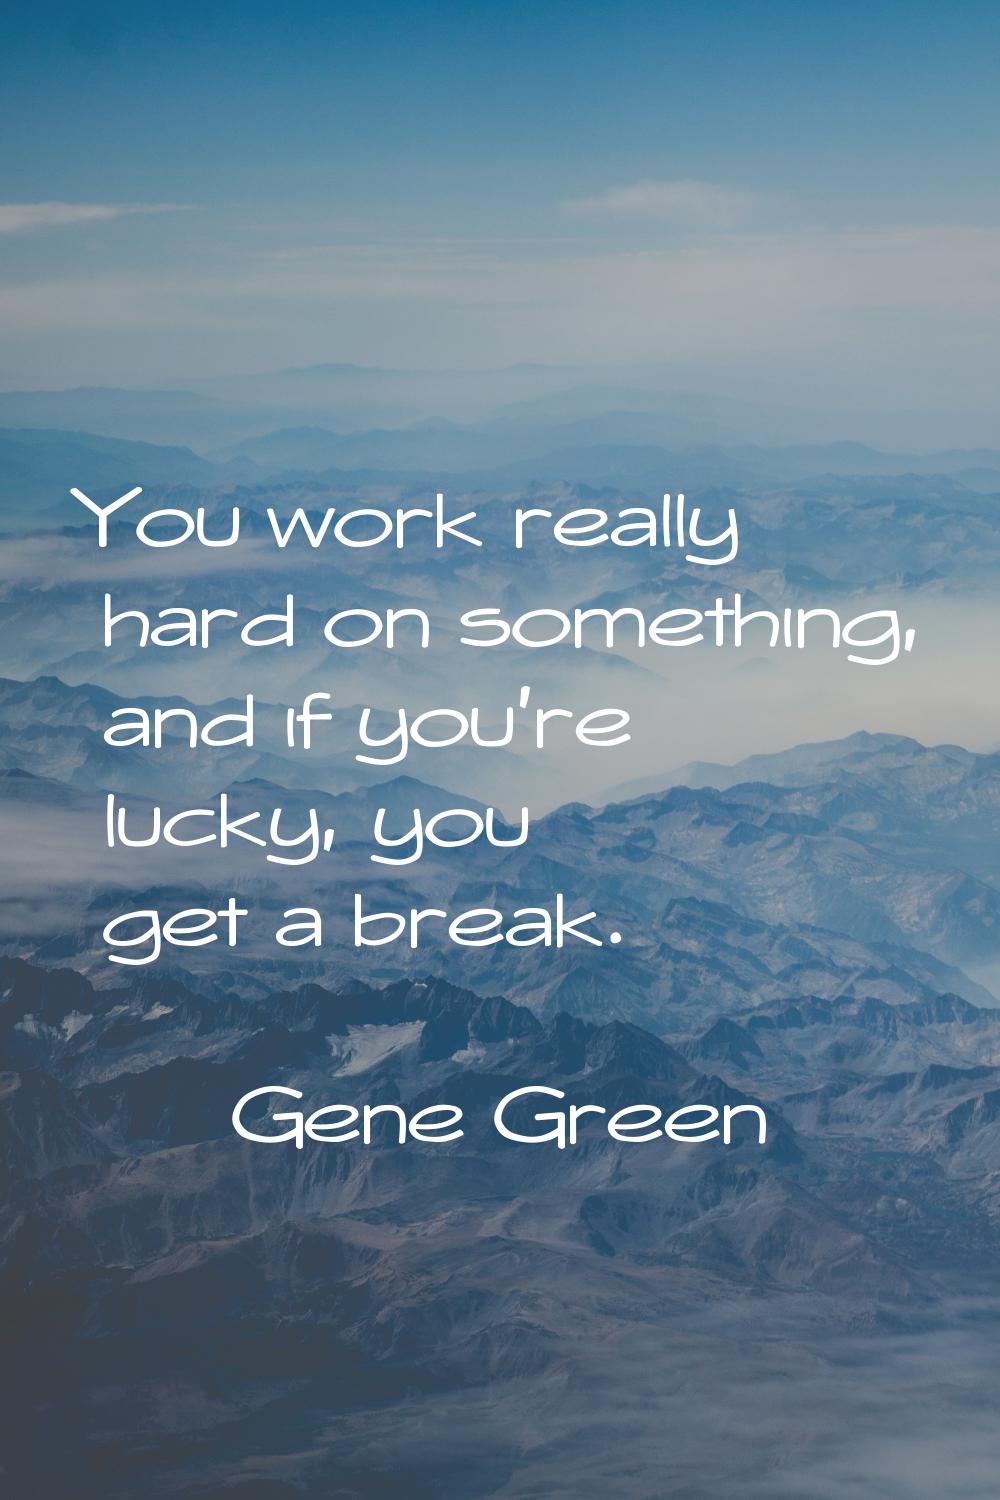 You work really hard on something, and if you're lucky, you get a break.